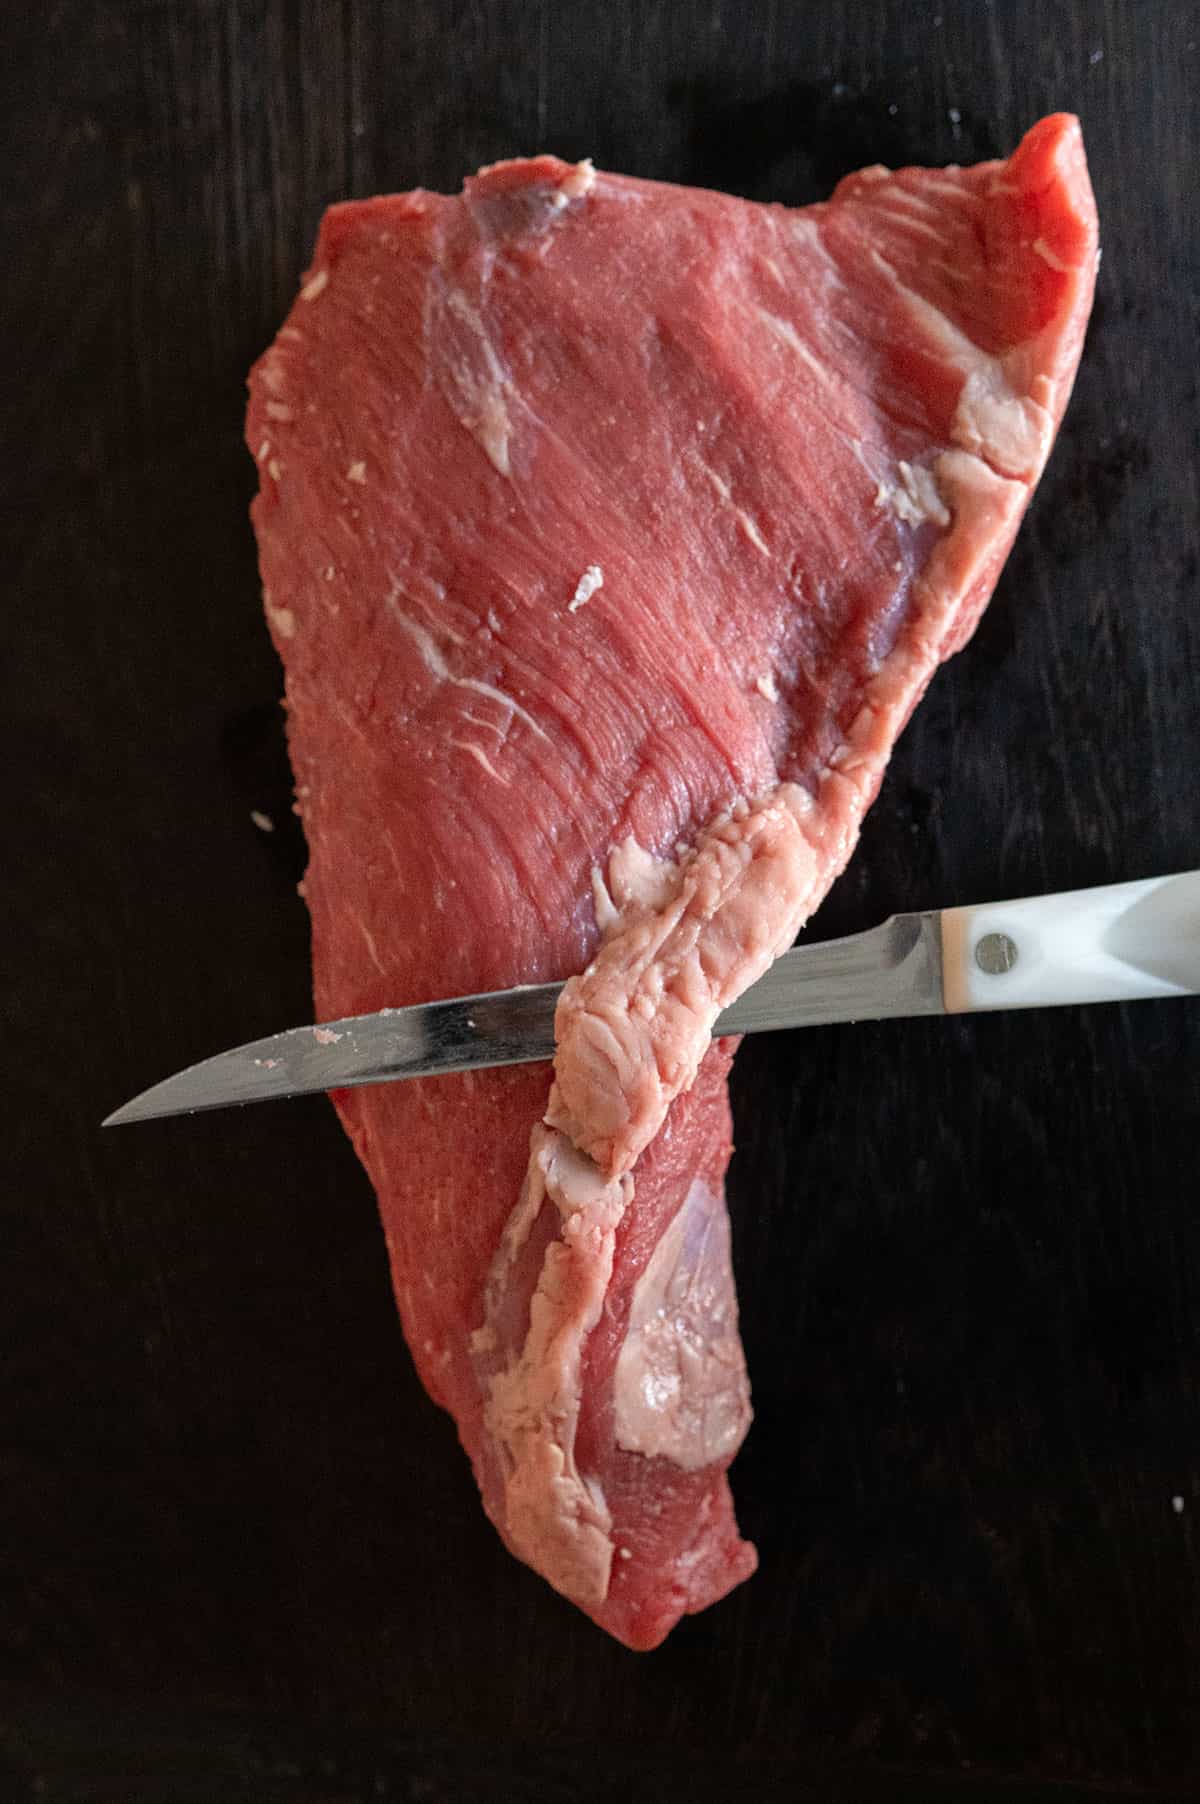 trimming fat from tri tip.